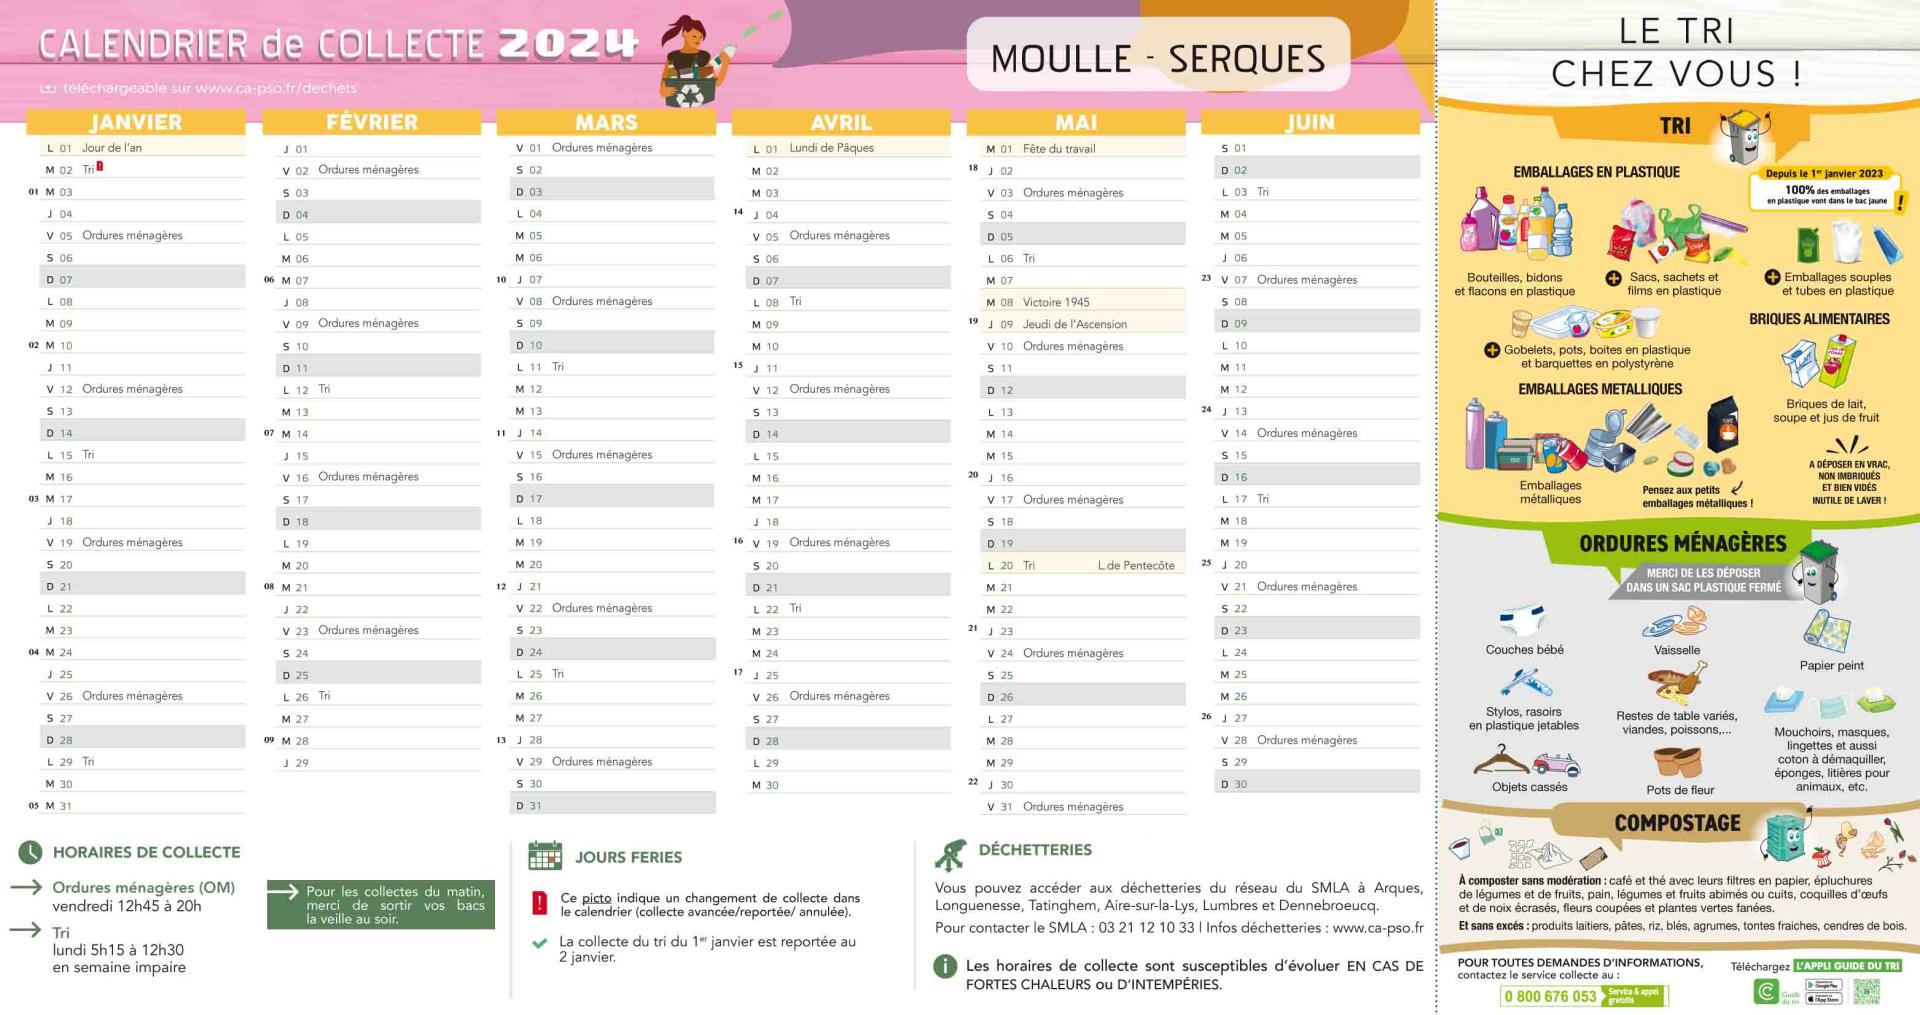 Moulle serques calendrier 2024 web 1